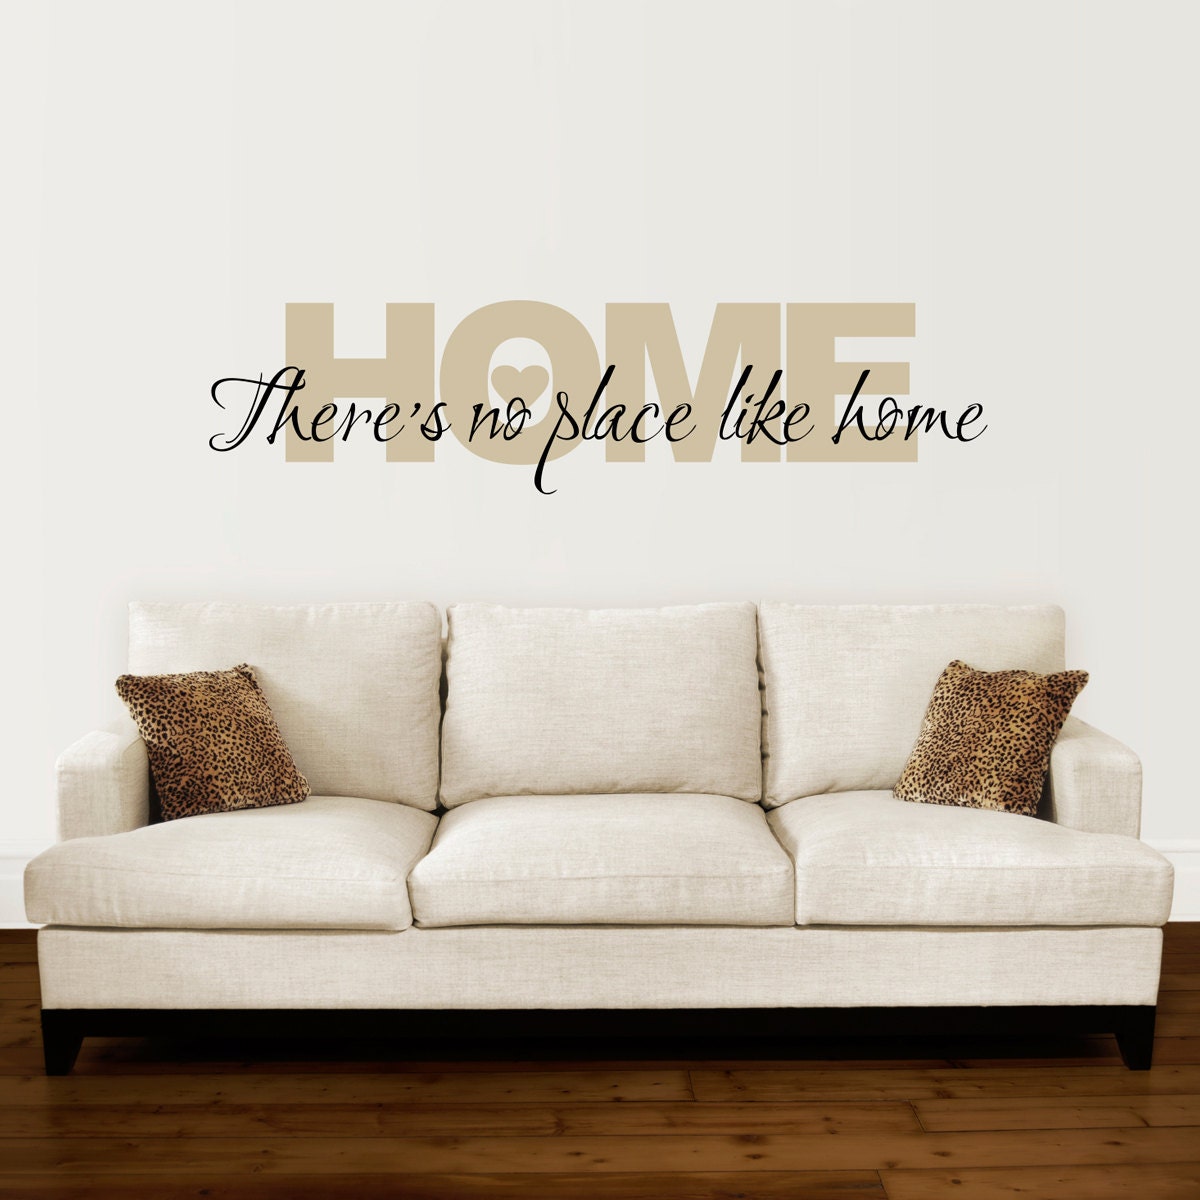 There's no place like Home Wall Decal - Home Quote - Wall Sticker - Extra Large 2 color